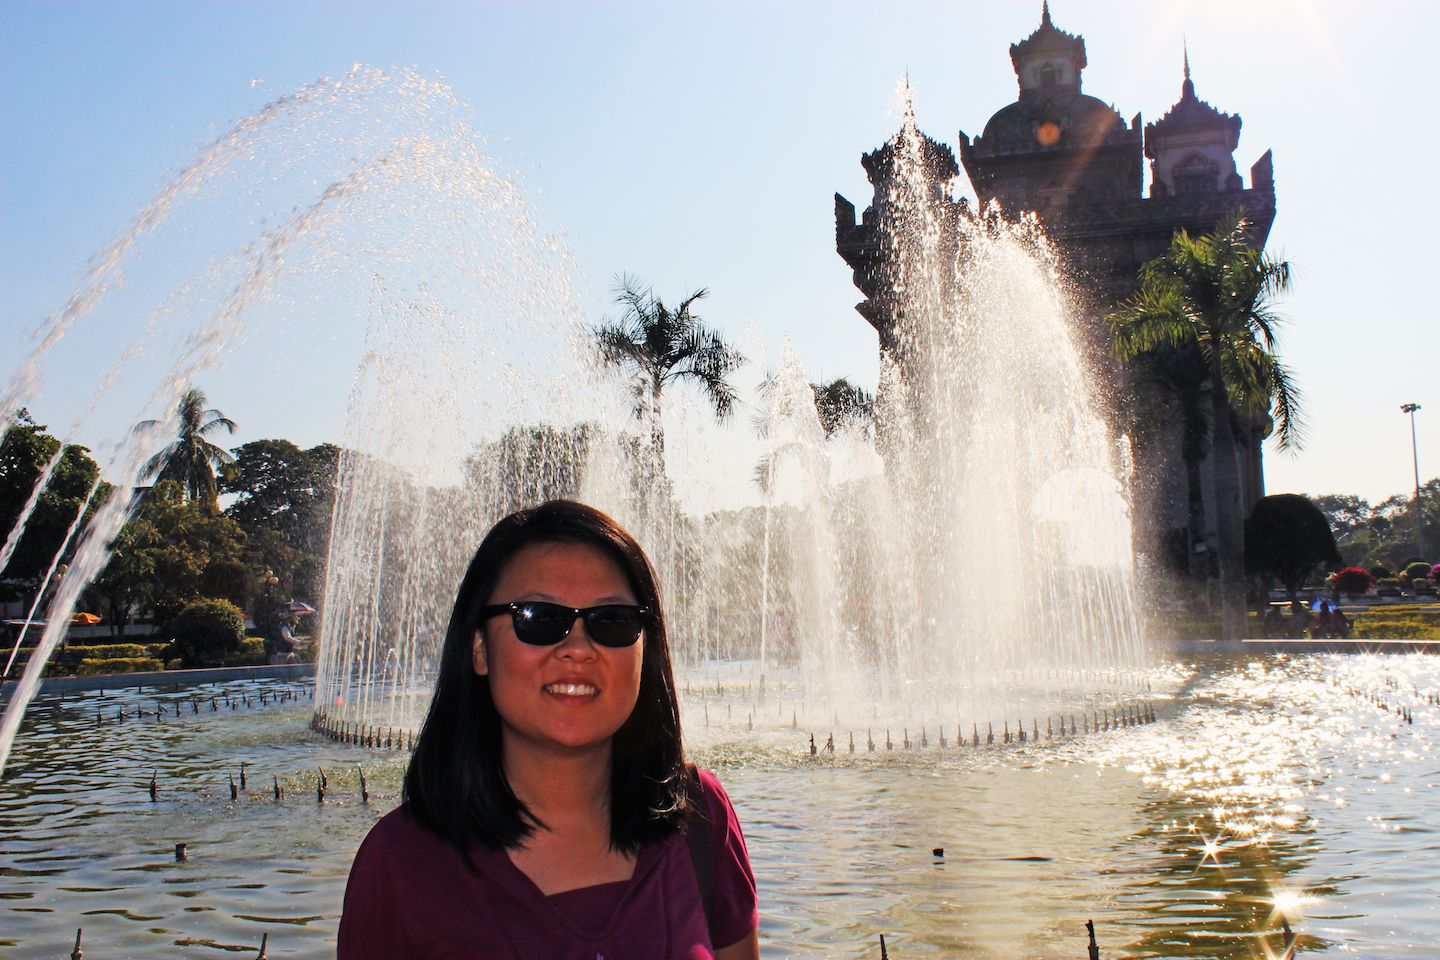 Julie at the fountain of Patuxay, Vientiane, Laos